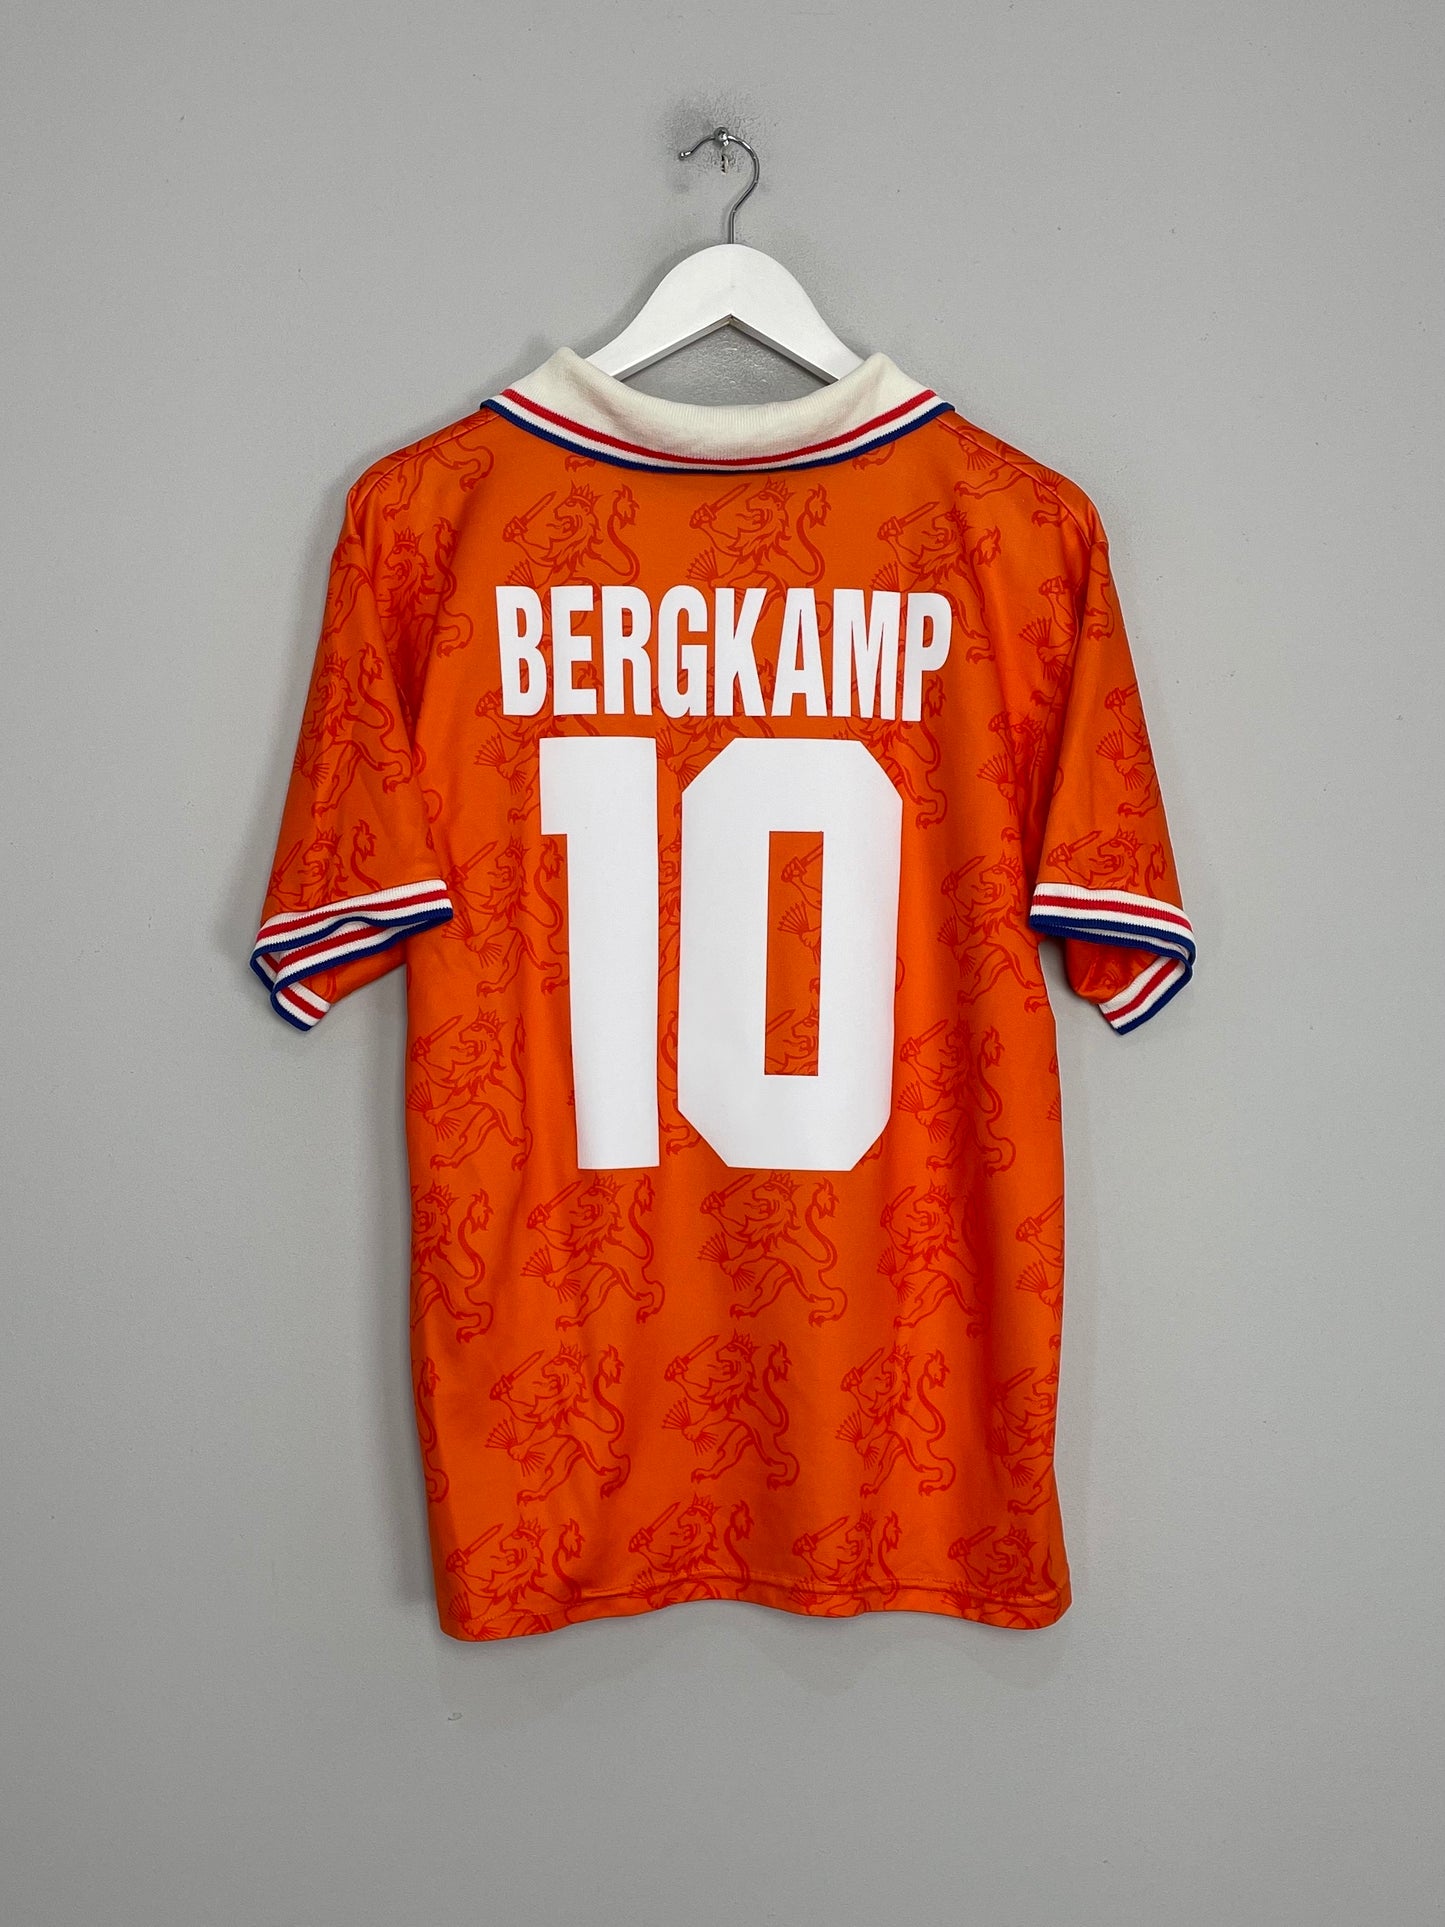 1994 NETHERLANDS BERGKAMP #10 *PLAYER ISSUE* HOME SHIRT (L) LOTTO